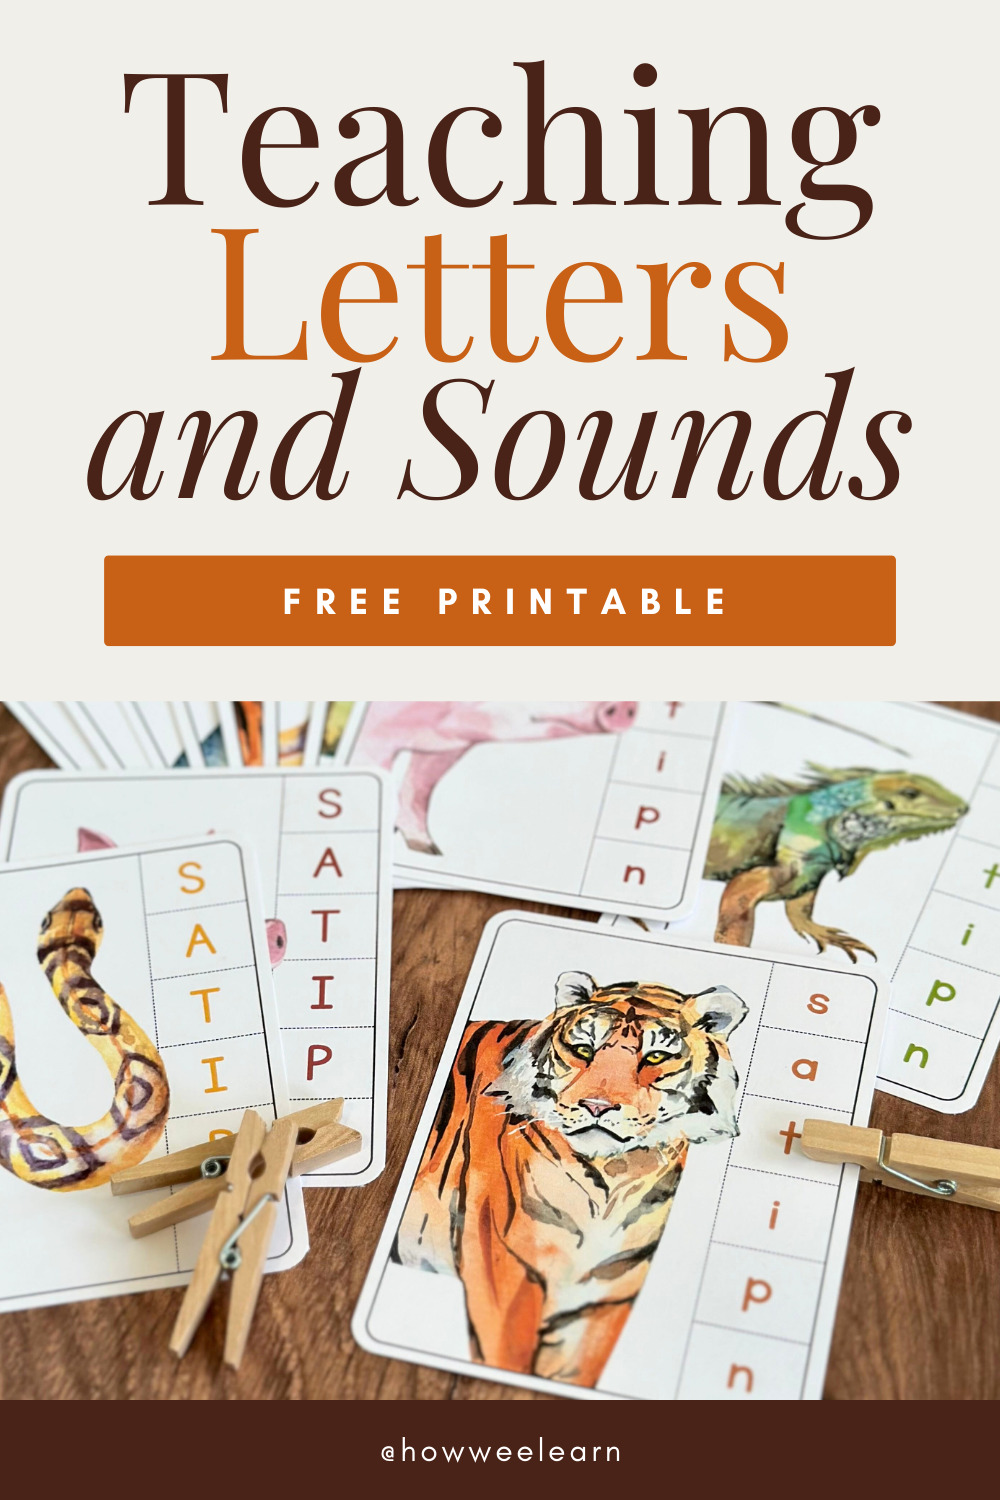 Teaching Letters and Sounds: Free Printable!